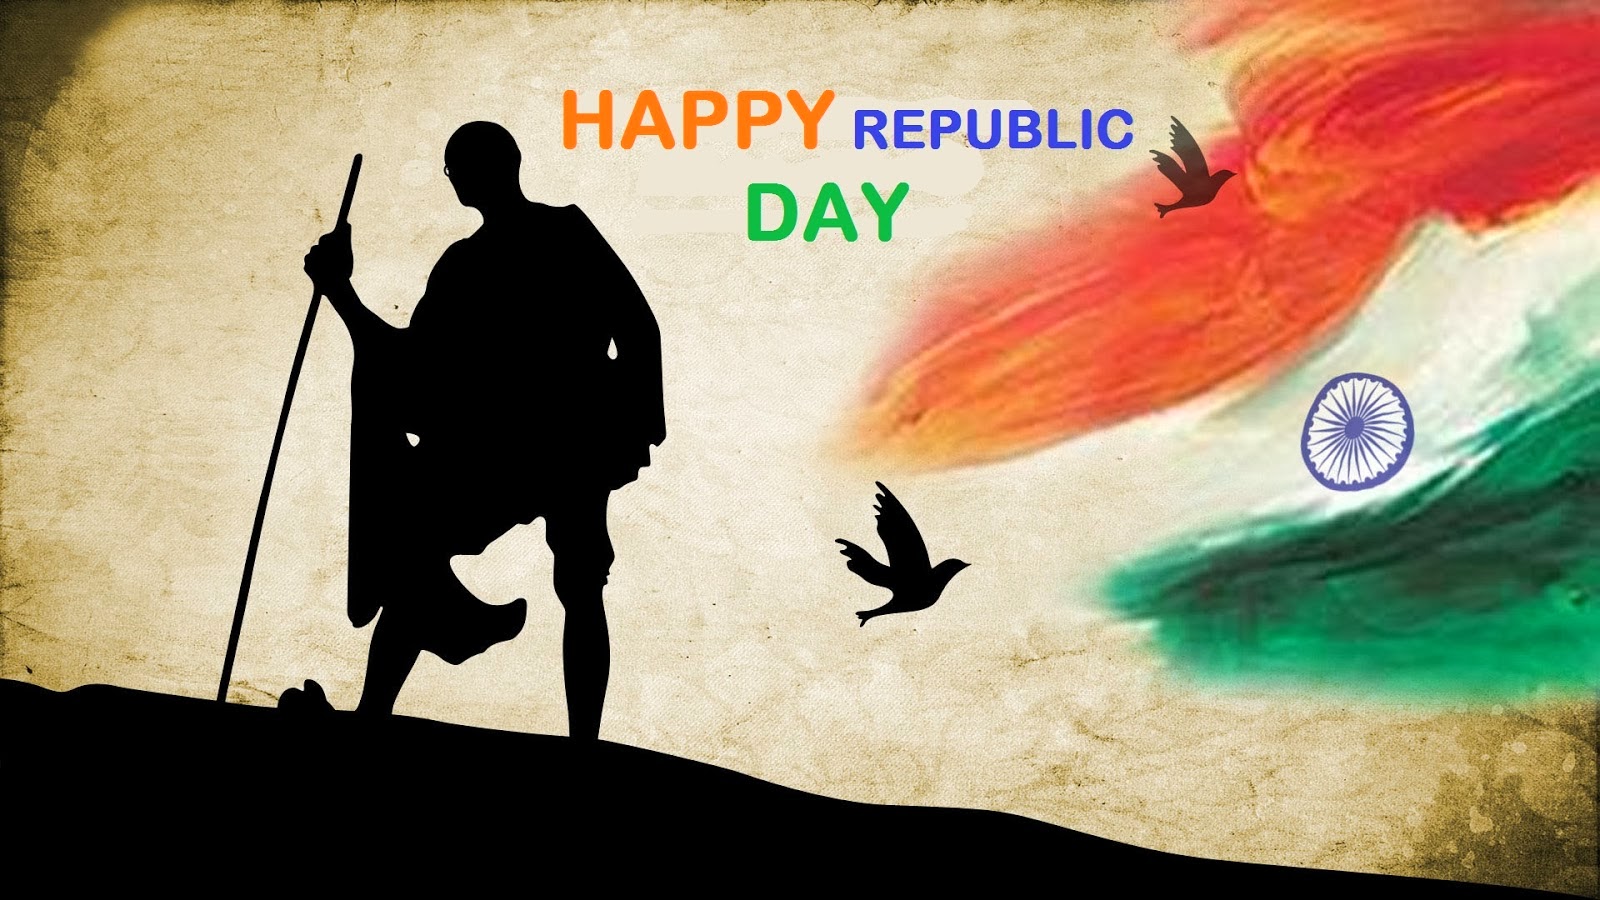 Best Republic Day HD Images and Wallpapers for You {Free Download} - Techicy